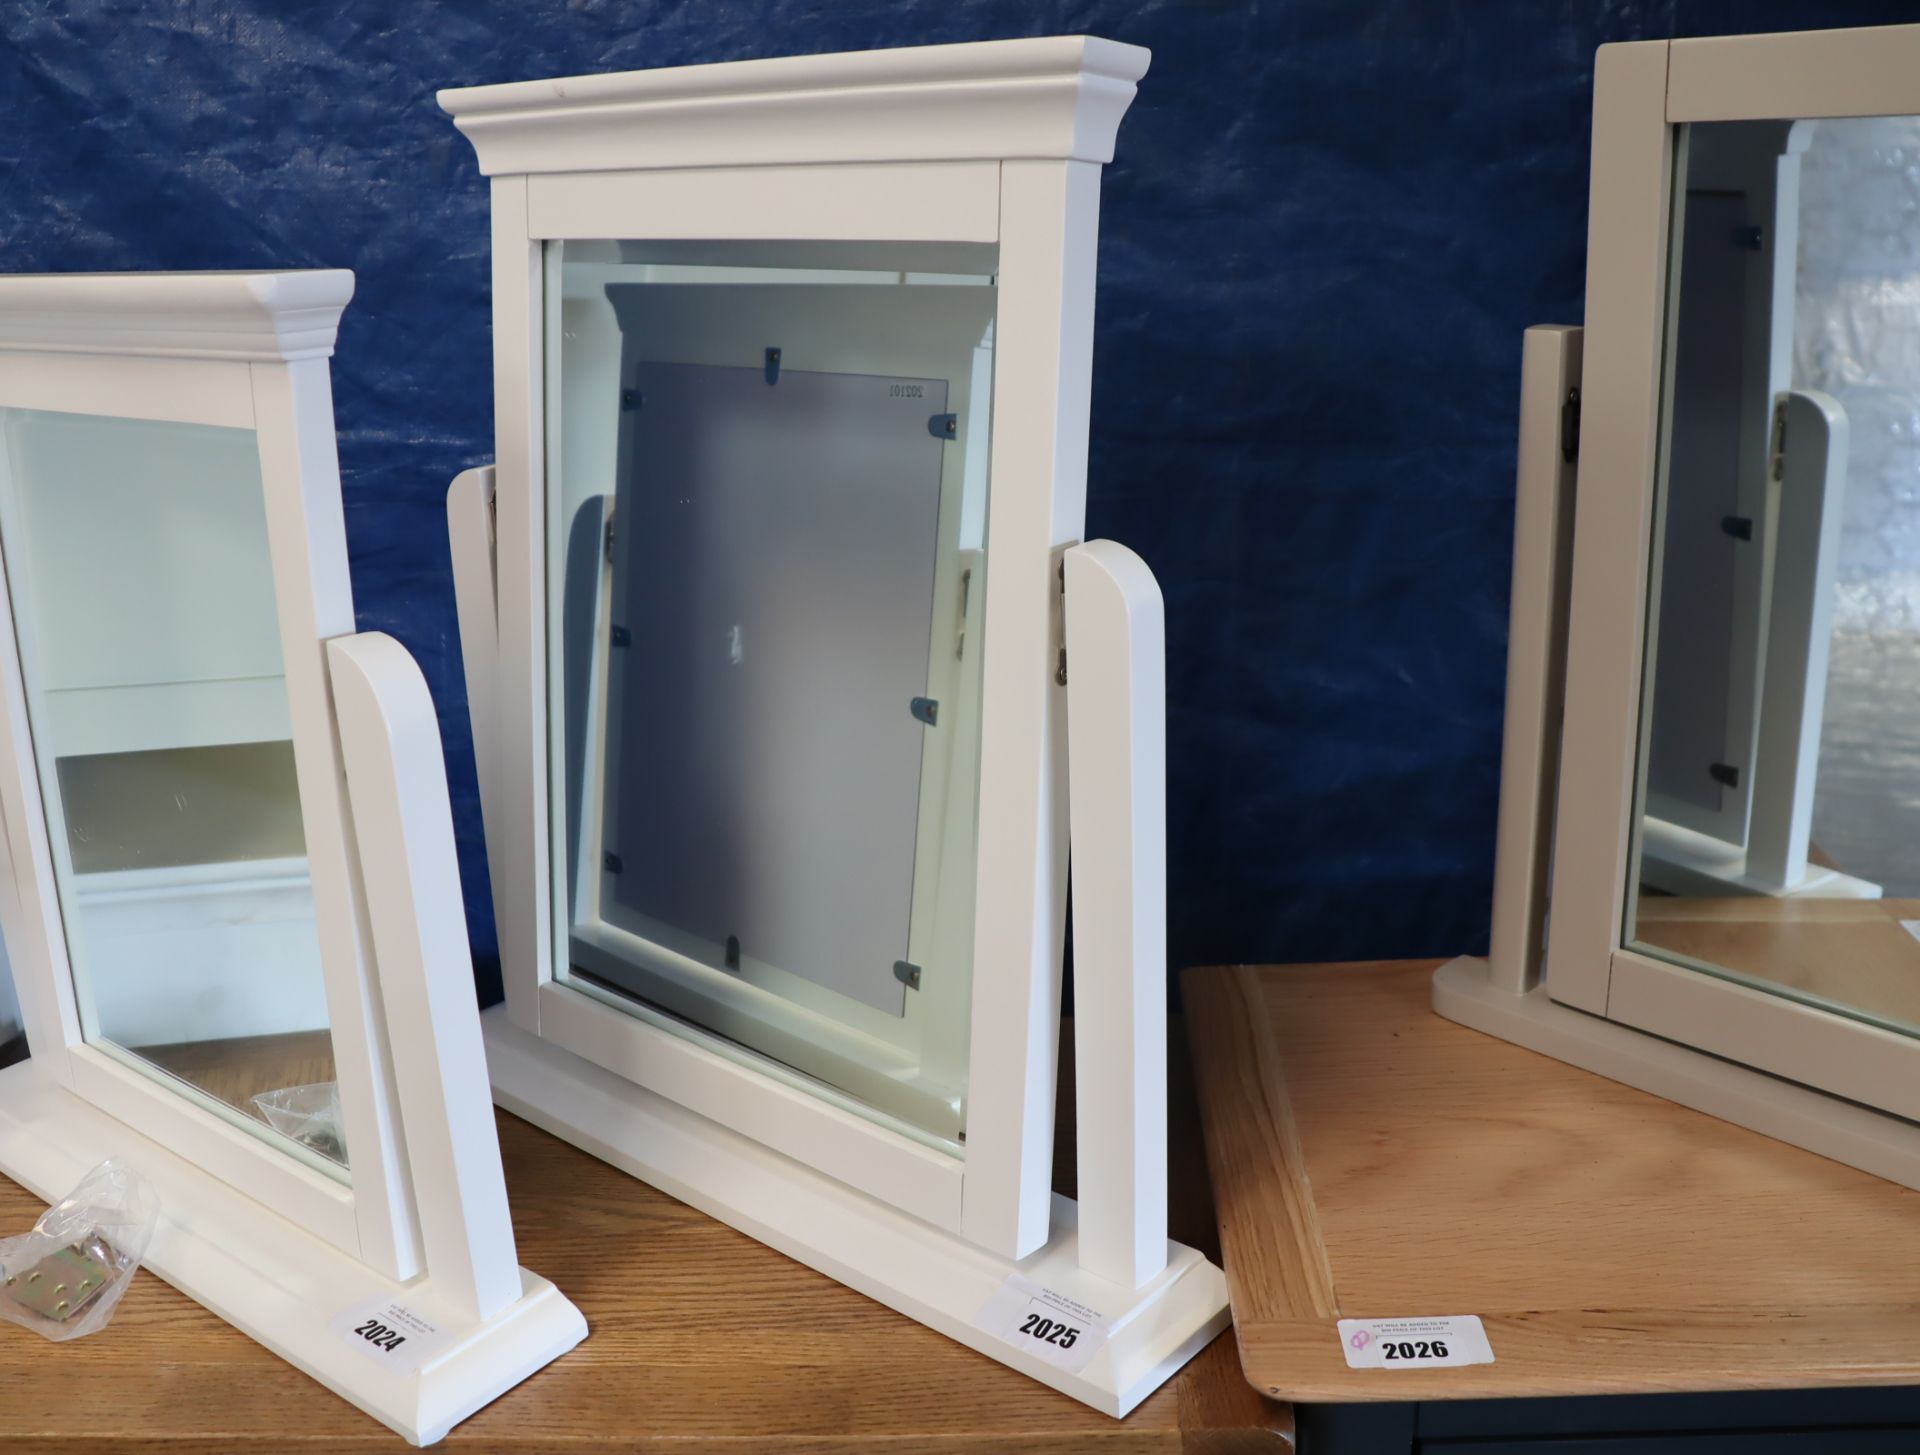 Free standing white dressing table mirror